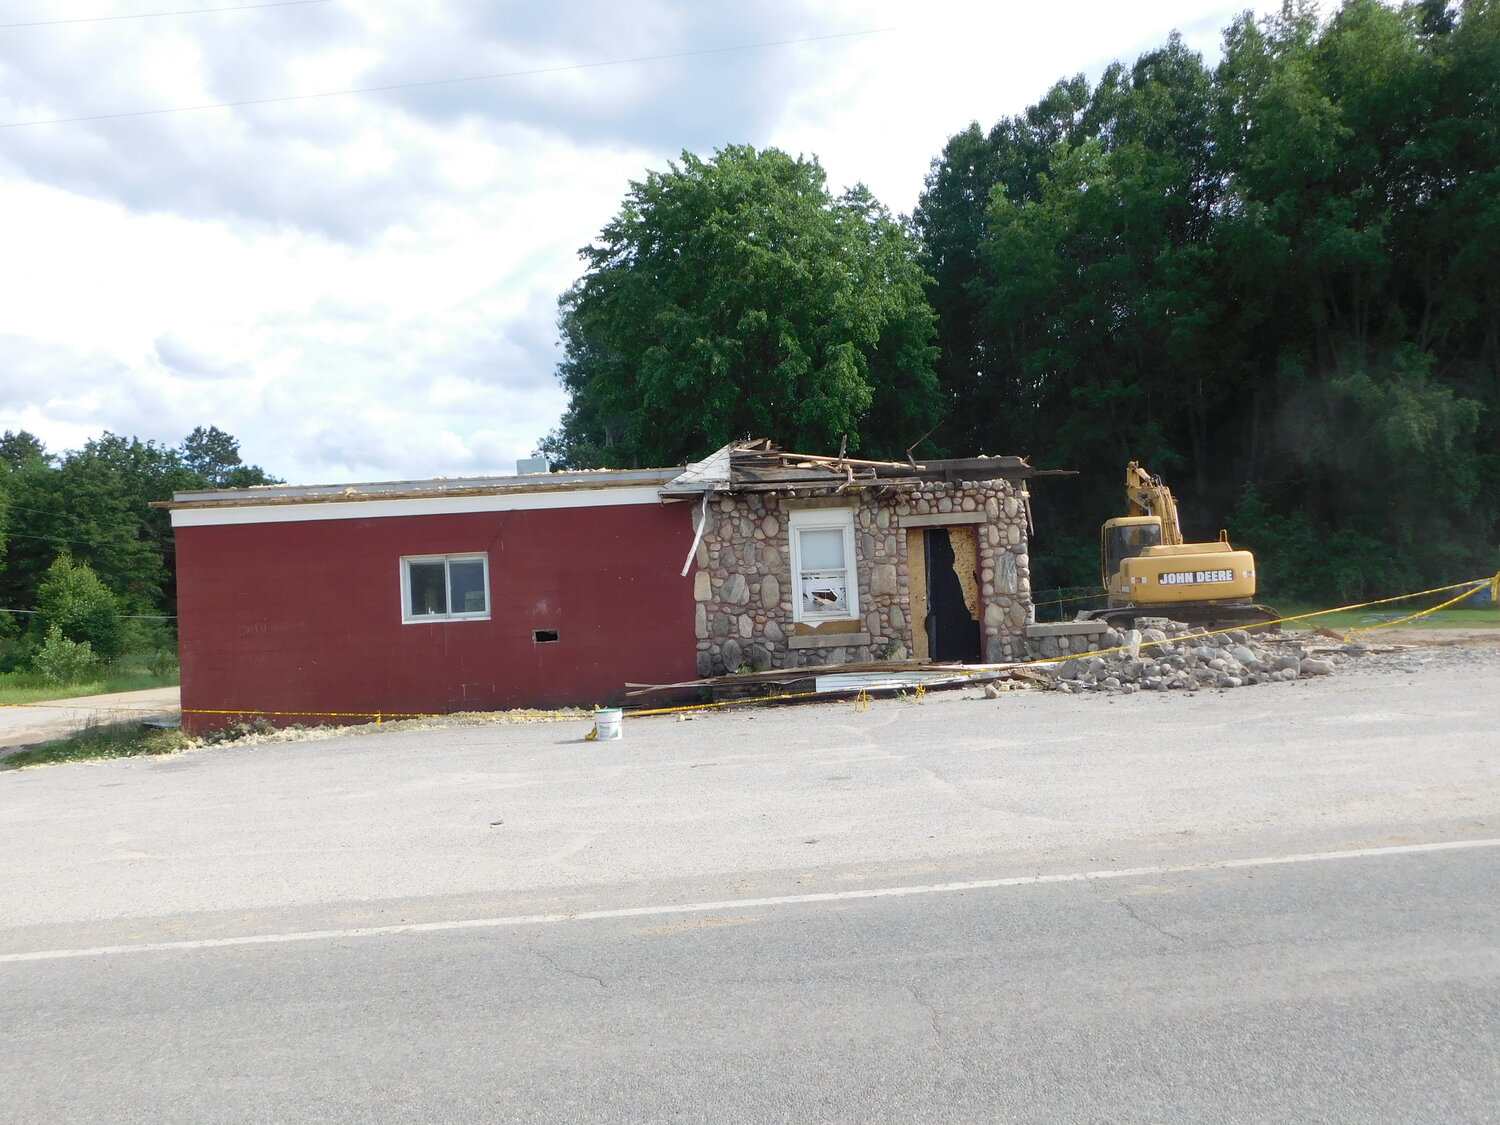 These photos show the demolition of the old Hamilton Township Hall in progress and at completion. Note the corner location of the standing water spout prior to demo.